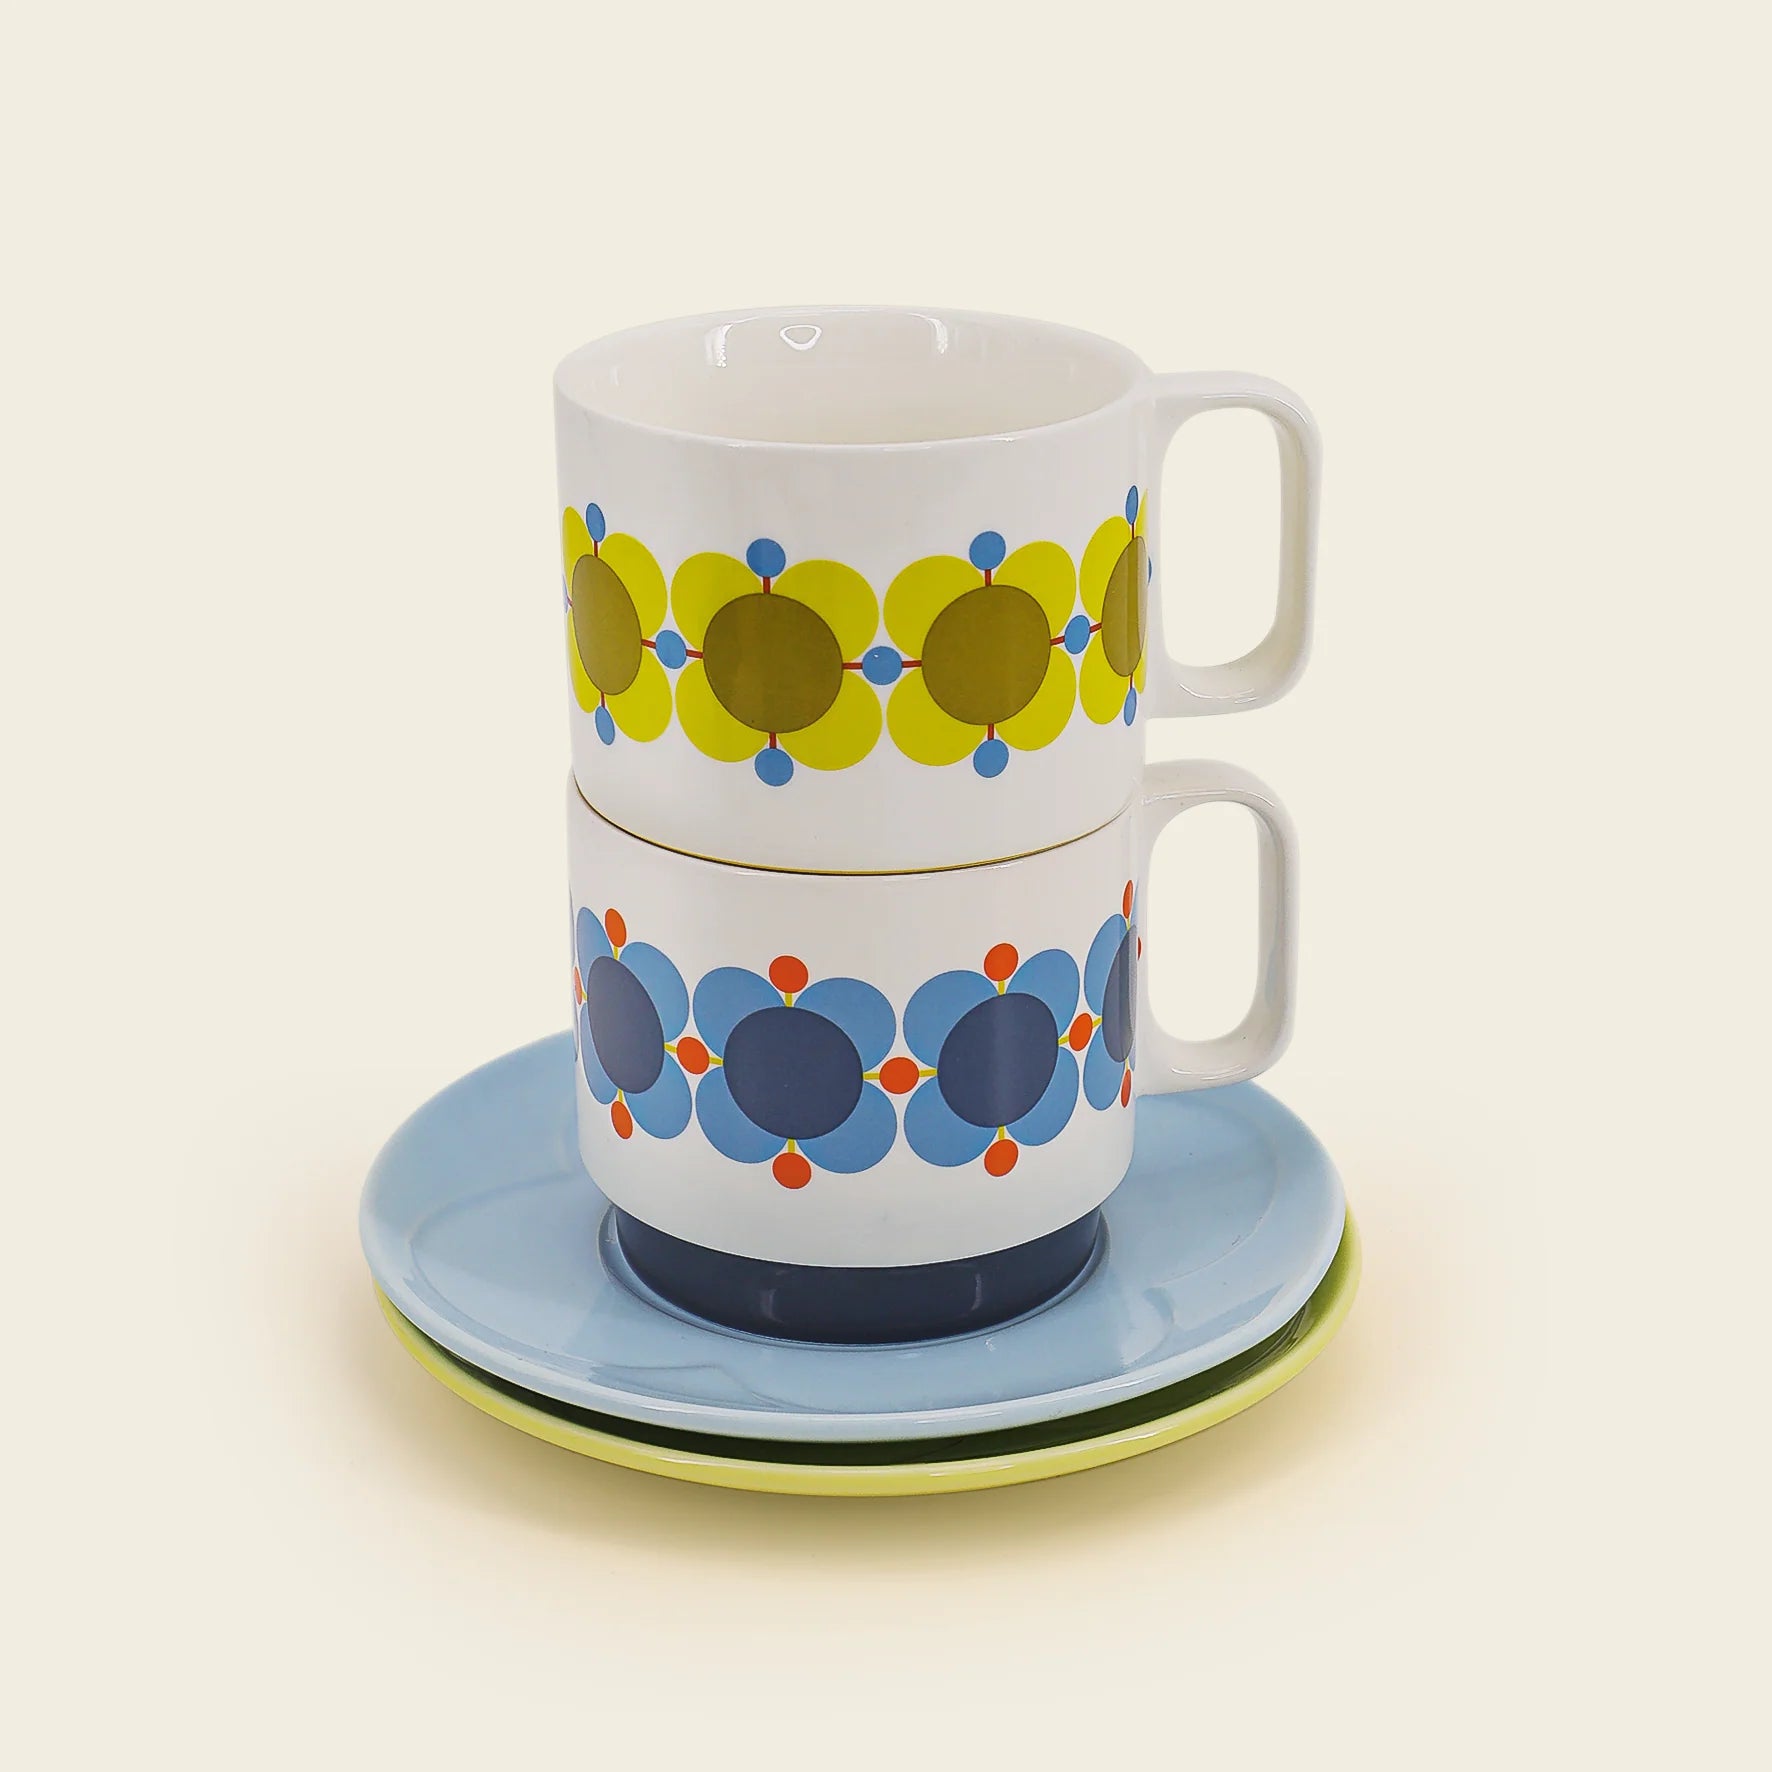 Fab Gifts | Orla Kiely Atomic Flower Tea Cup & Saucer Set of 2 by Weirs of Baggot Street